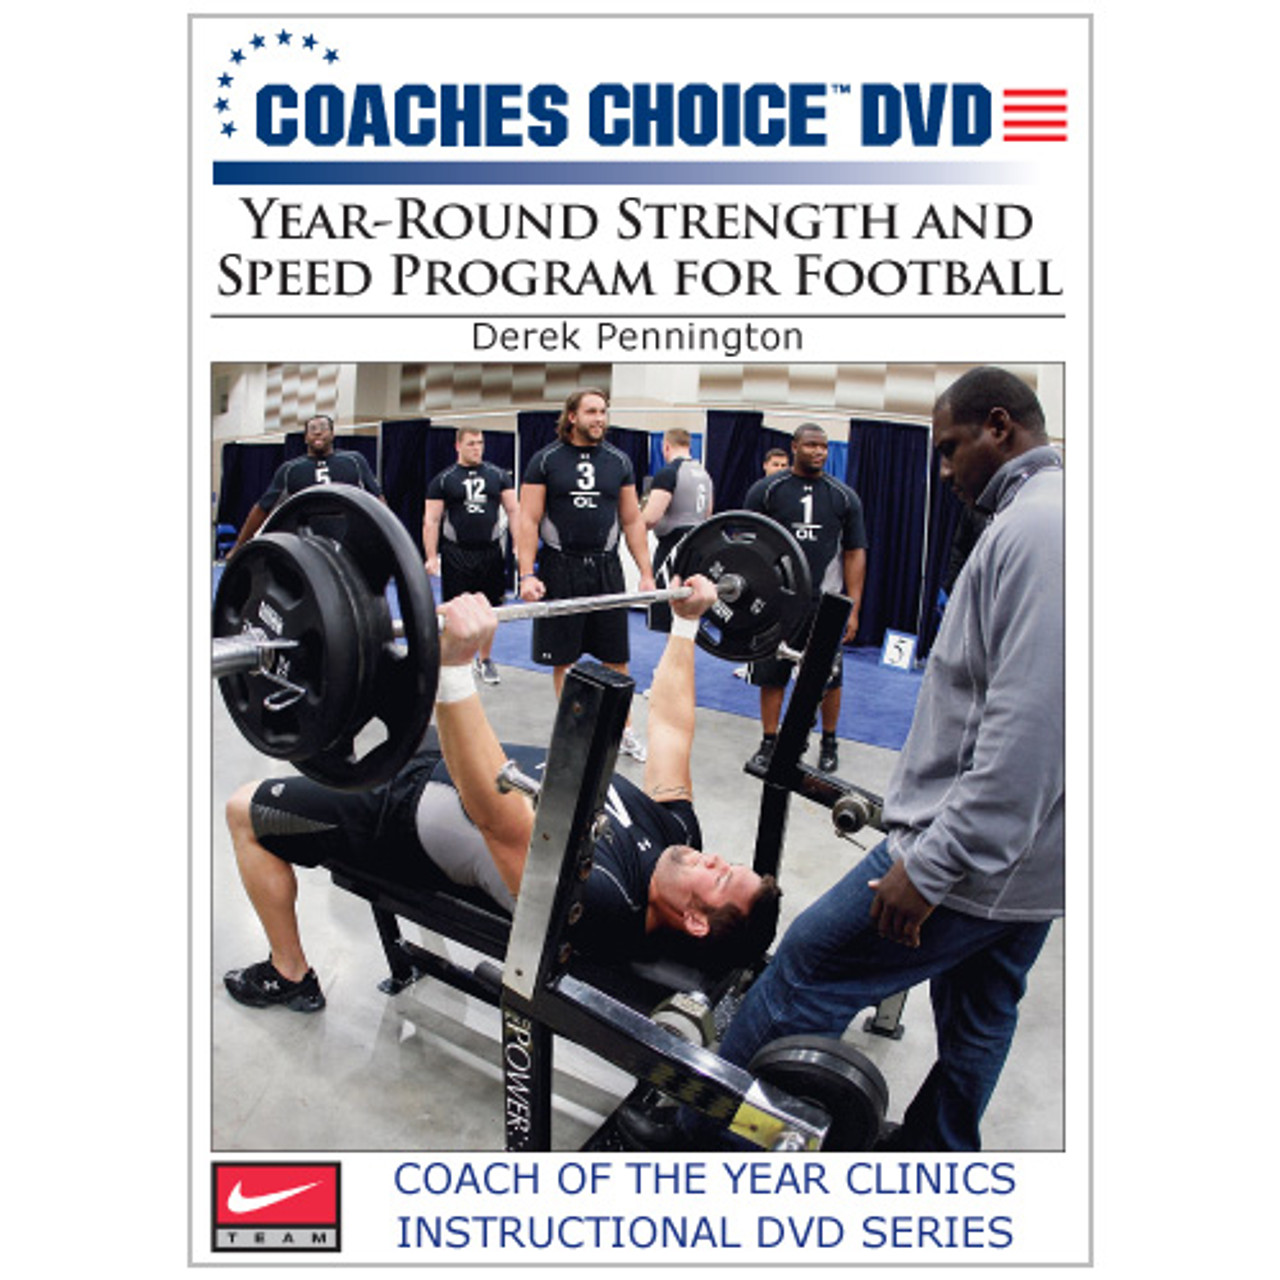 Year Round Strength and Speed Programs, Designing Year Round Programs DVD,  Athletic Performance Training DVD